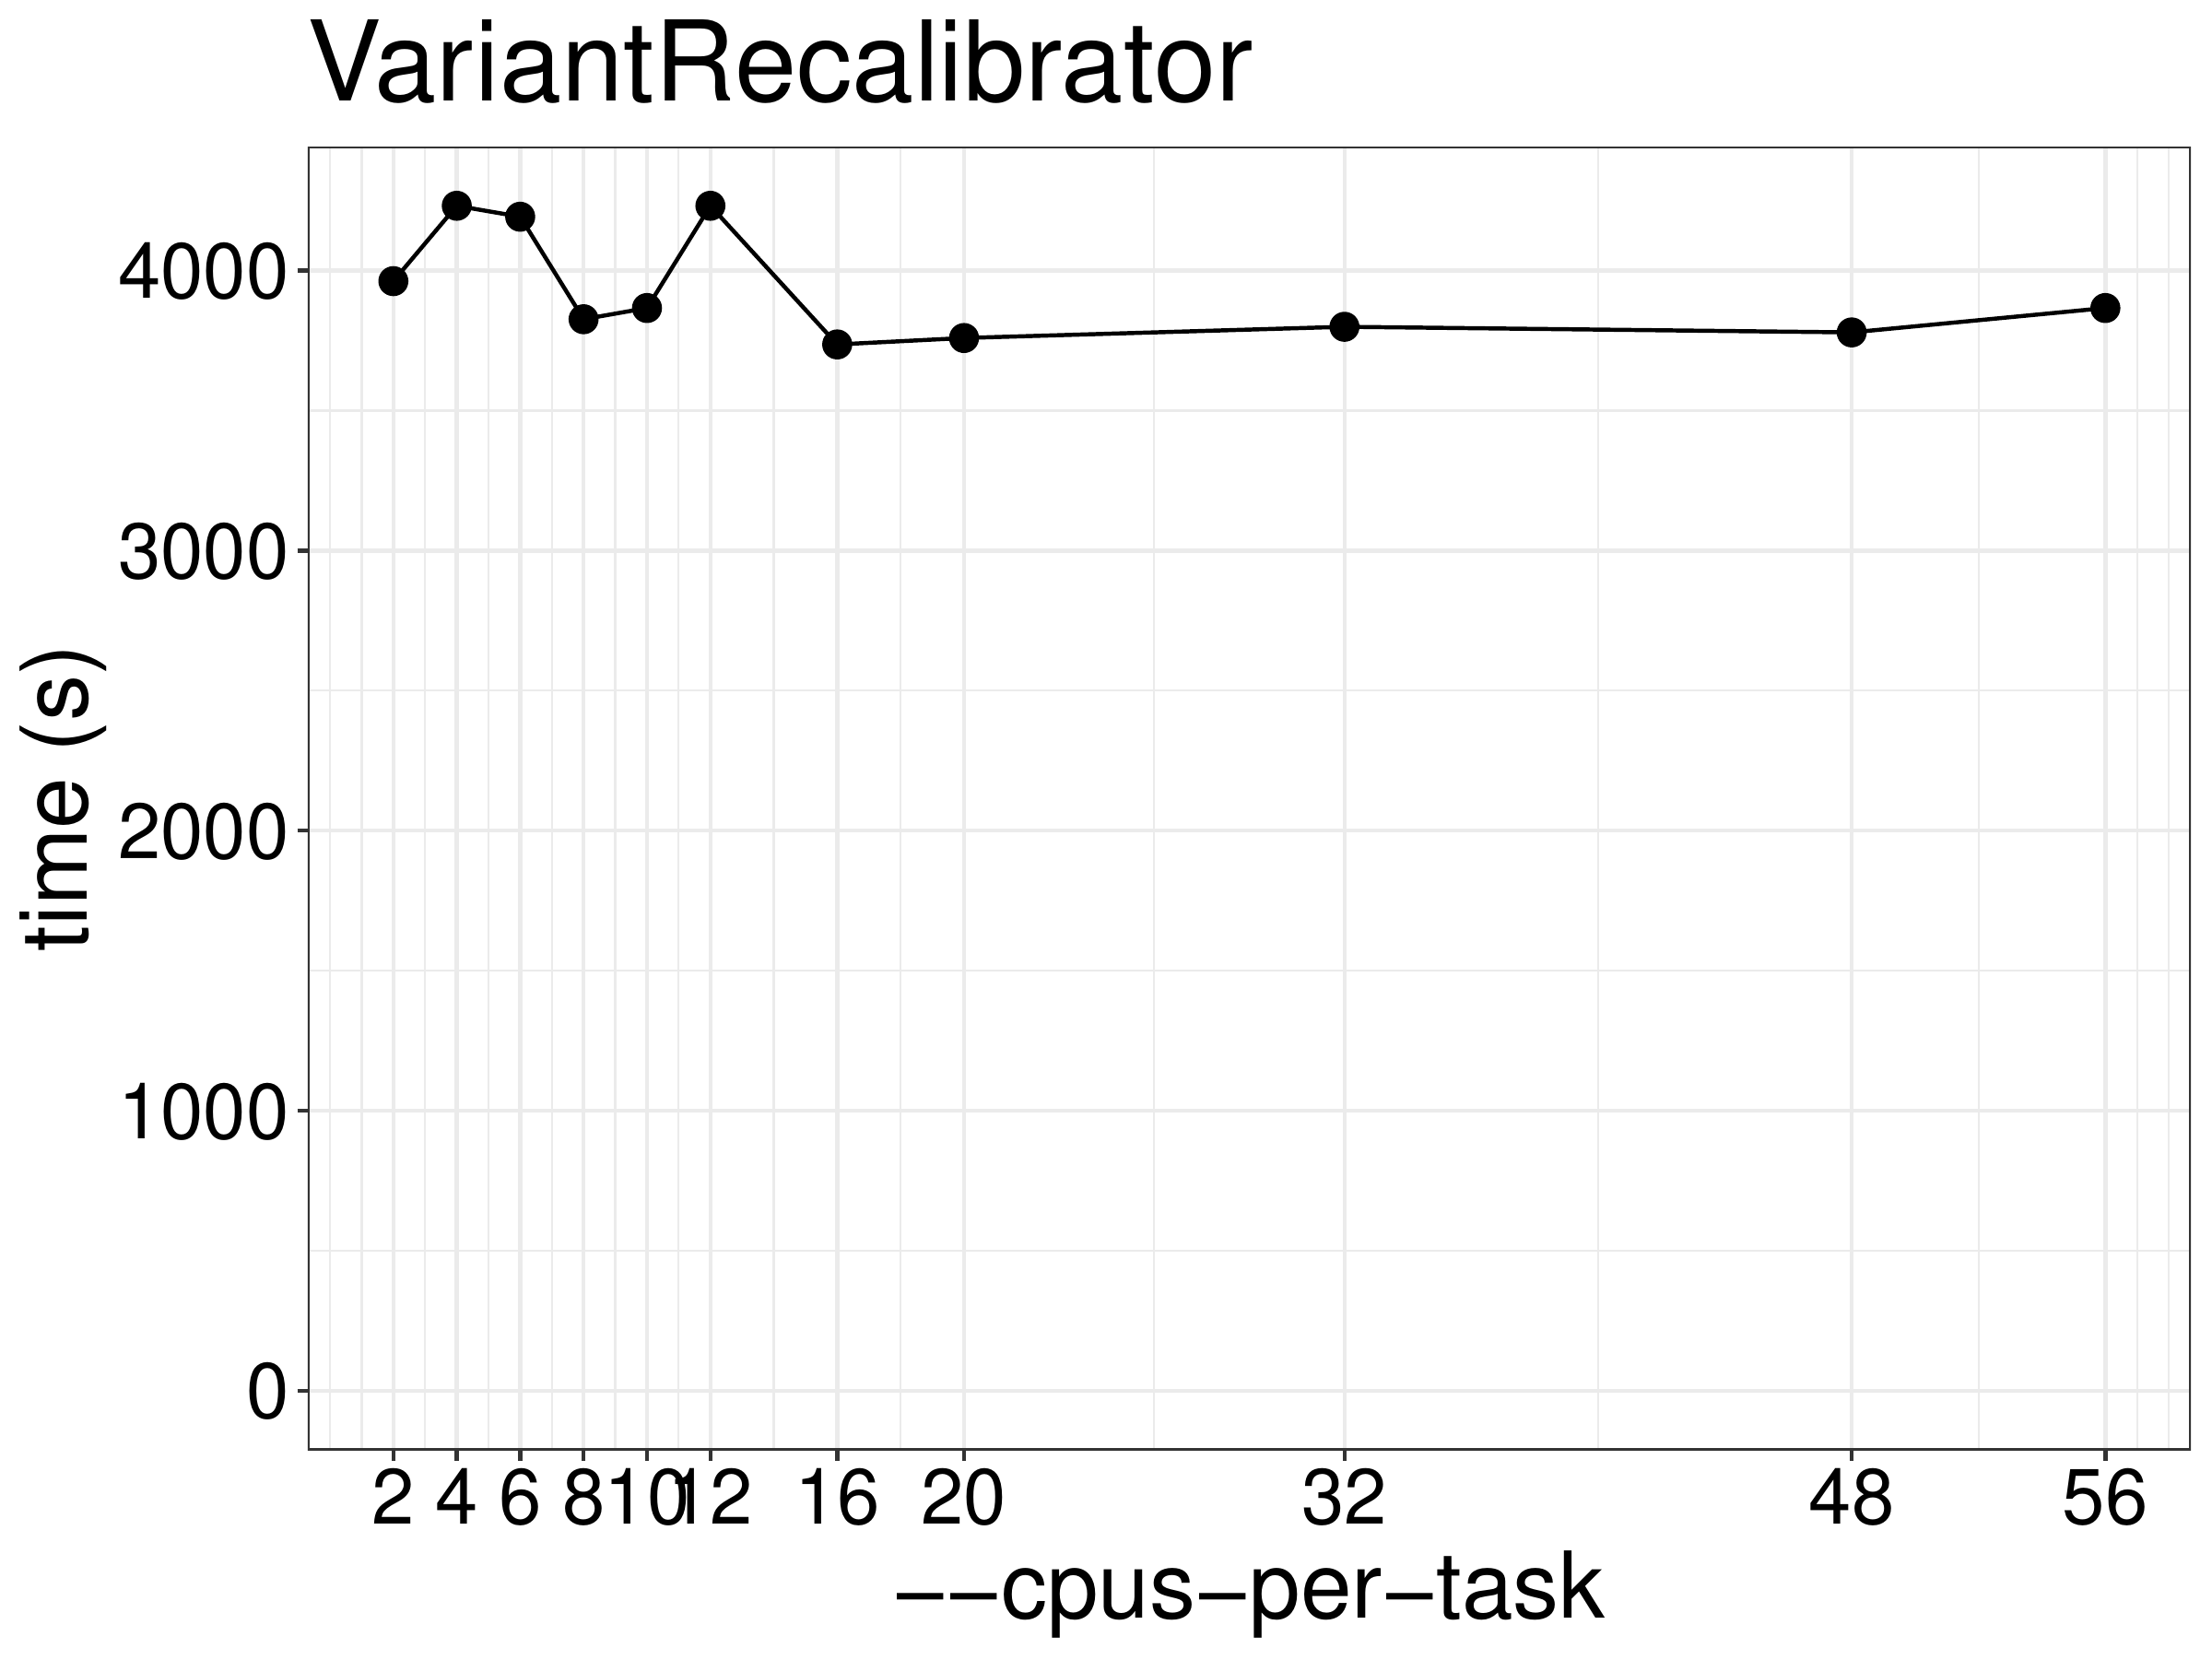 Runtime of VariantRecalibrator as a function of the number of threads